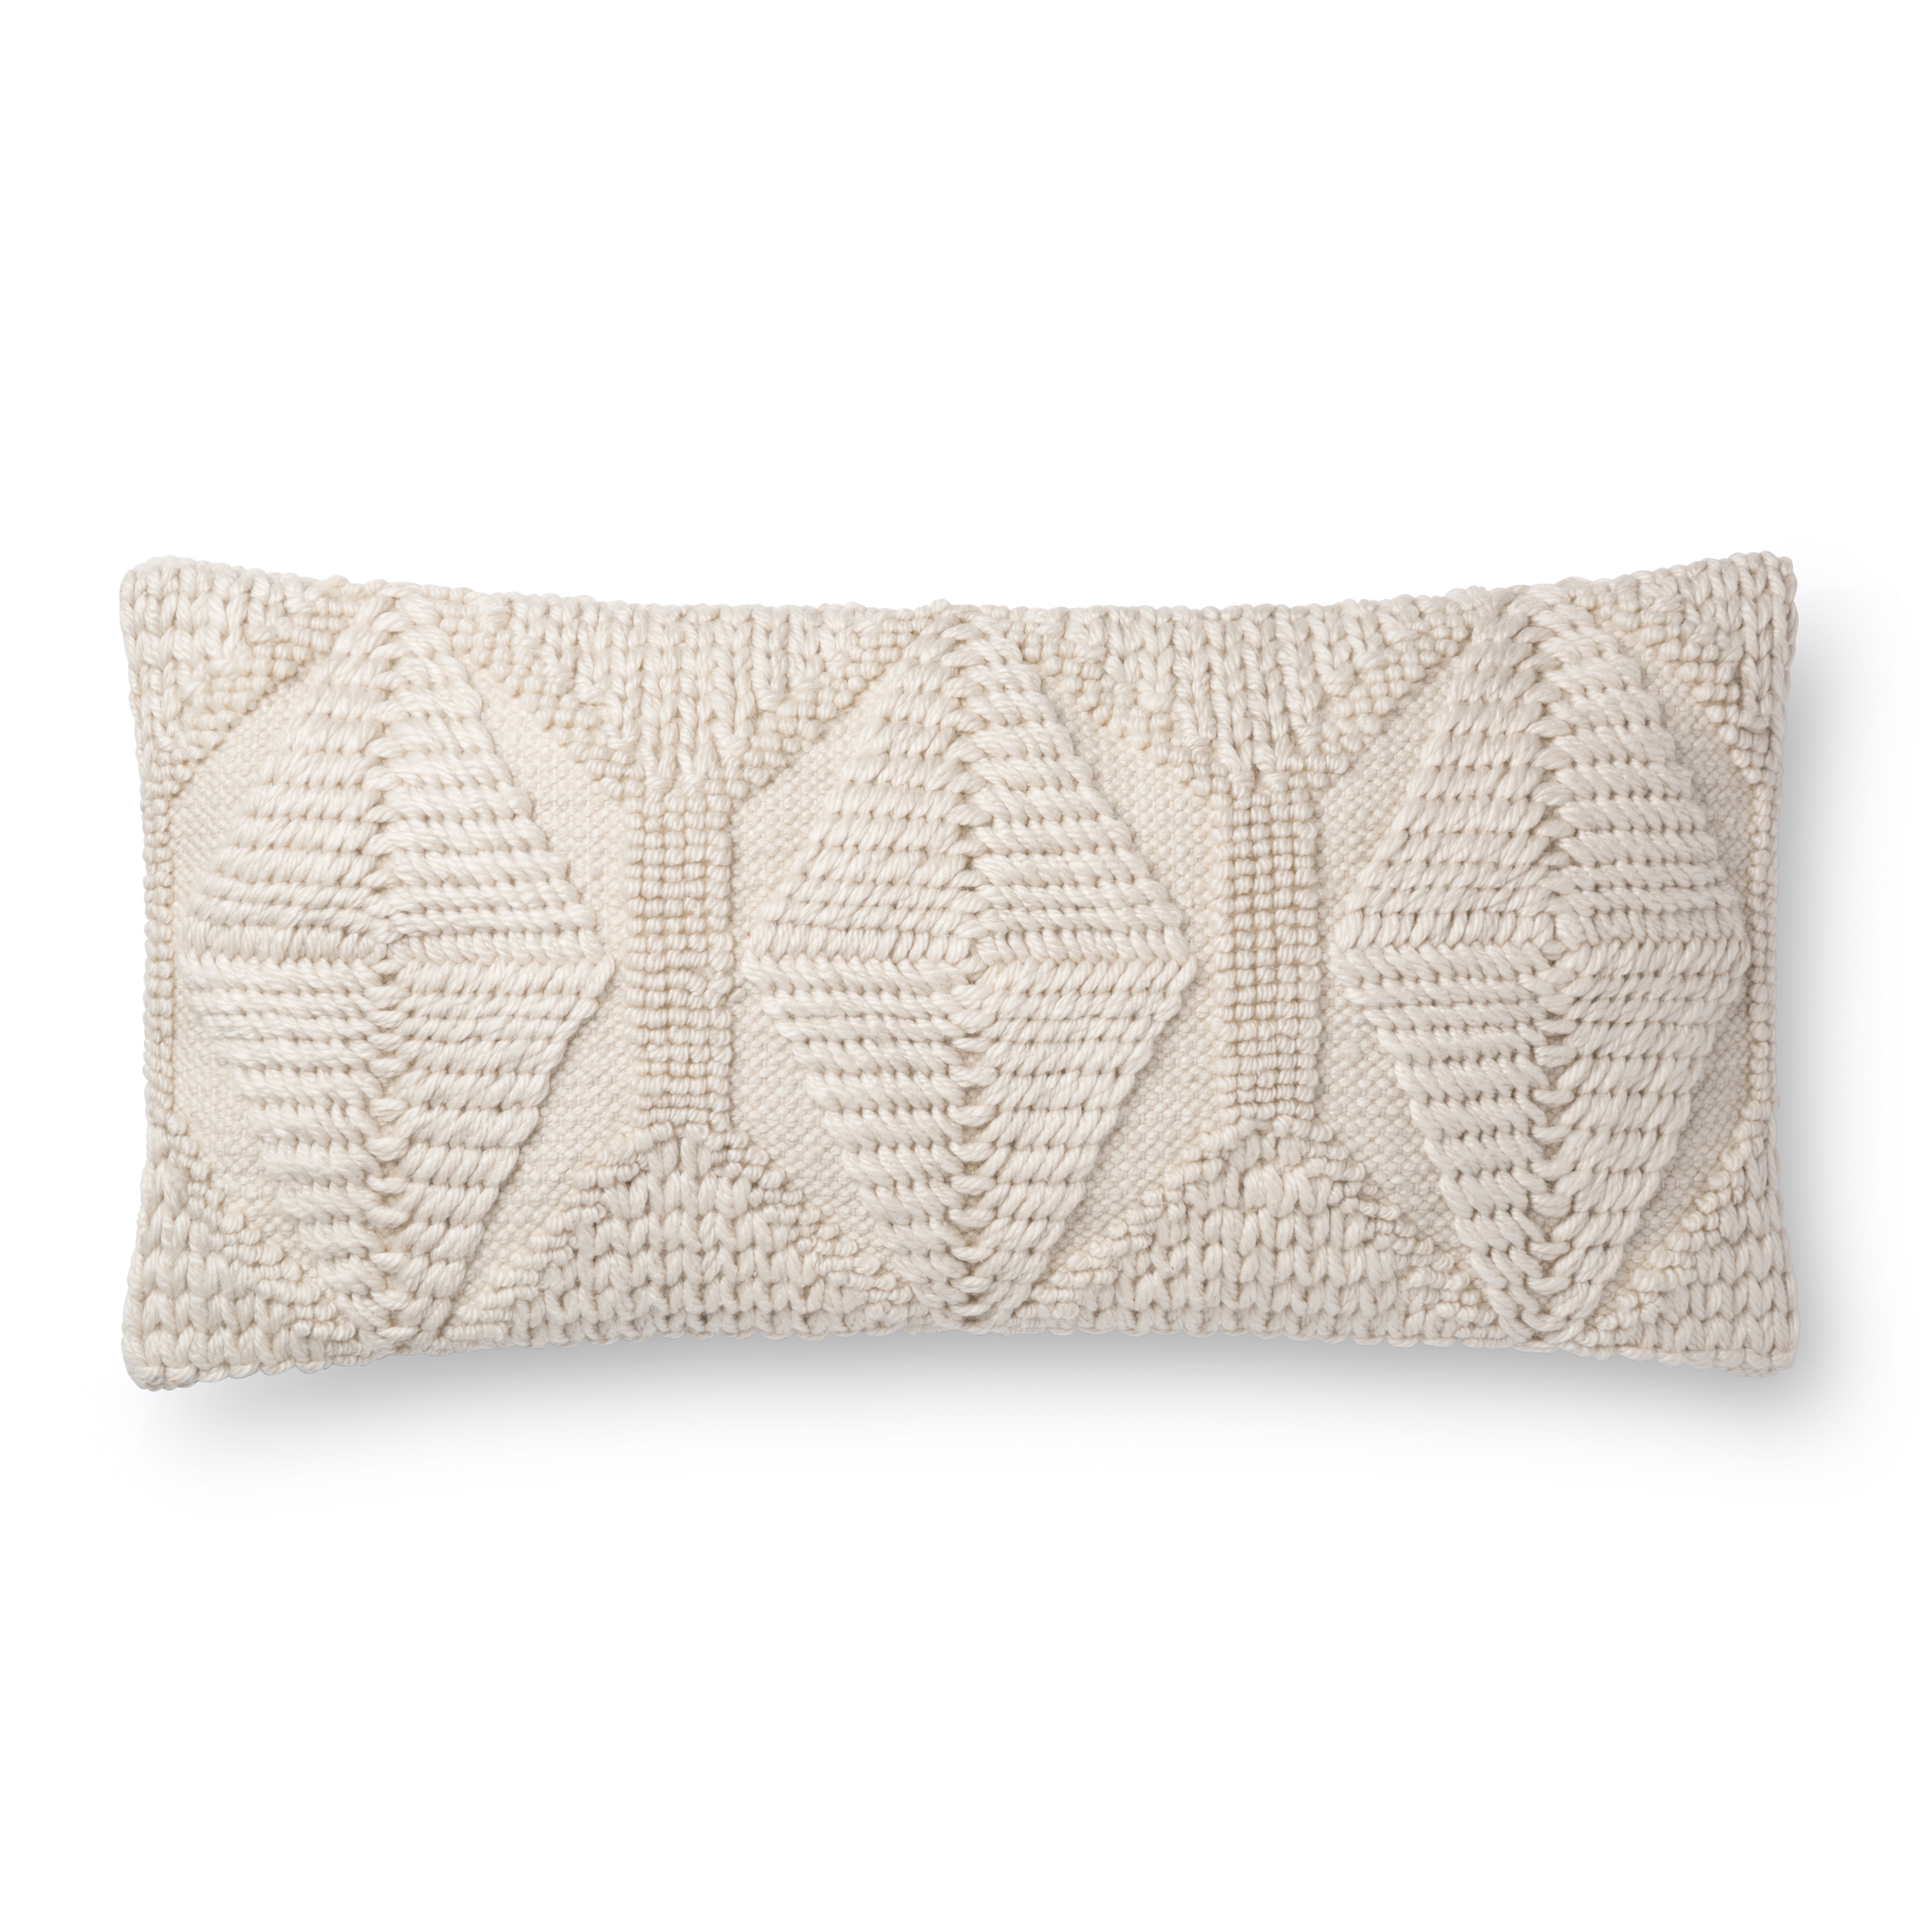 PILLOWS P1107 IVORY 12" x 27" Cover w/Poly - Magnolia Home by Joana Gaines Crafted by Loloi Rugs